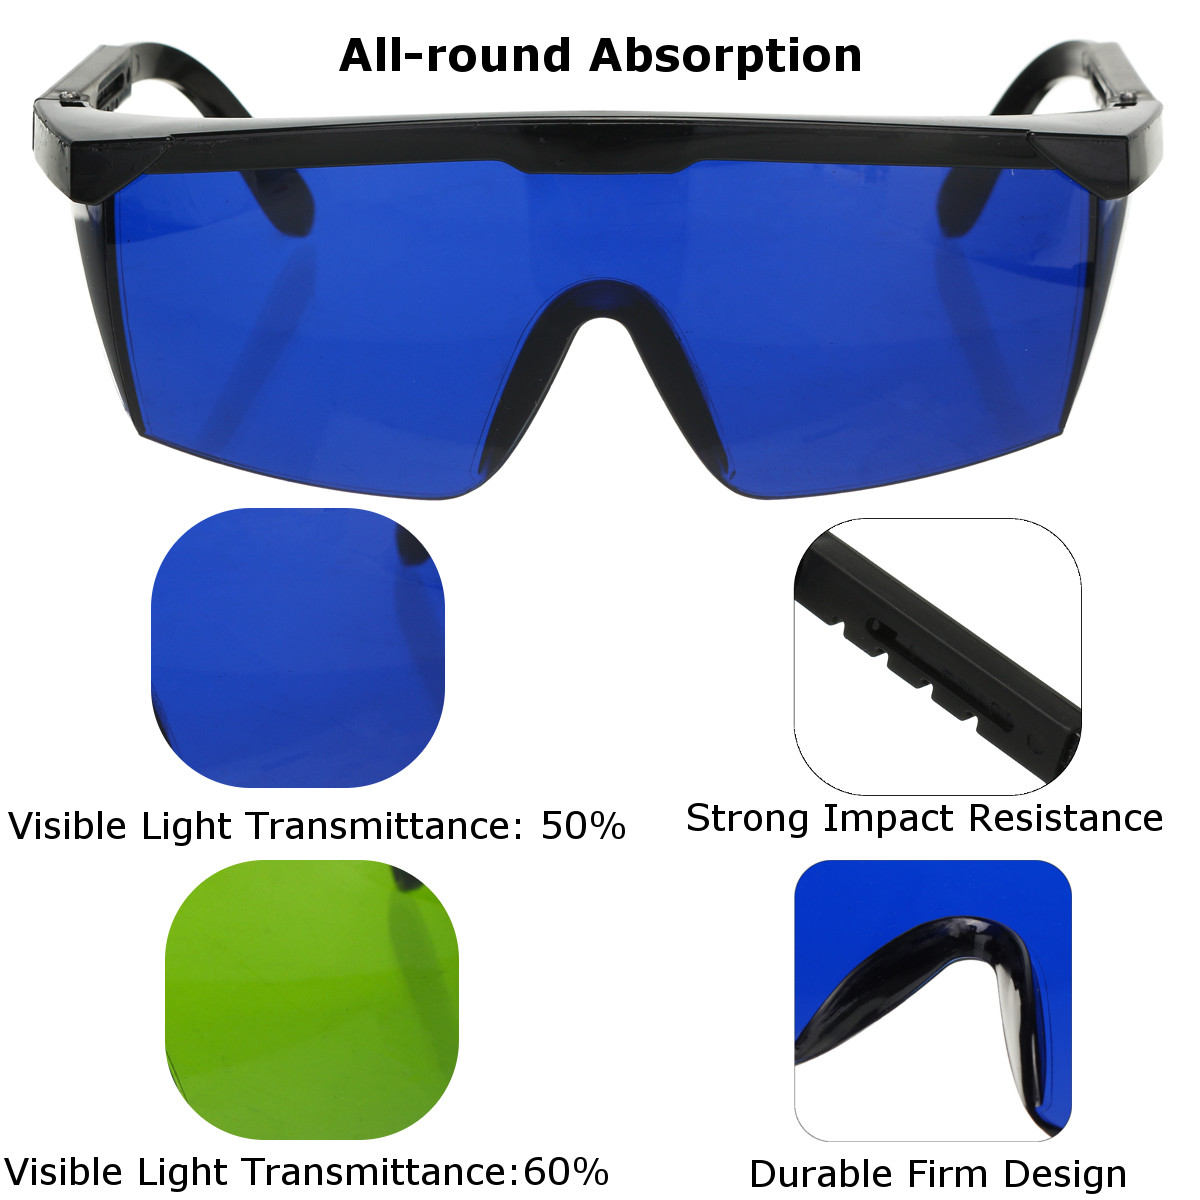 Pro-Laser-Protection-Goggles-Protective-Safety-Glasses-IPL-OD4D-190nm-2000nm-Laser-Goggles-1424199-7